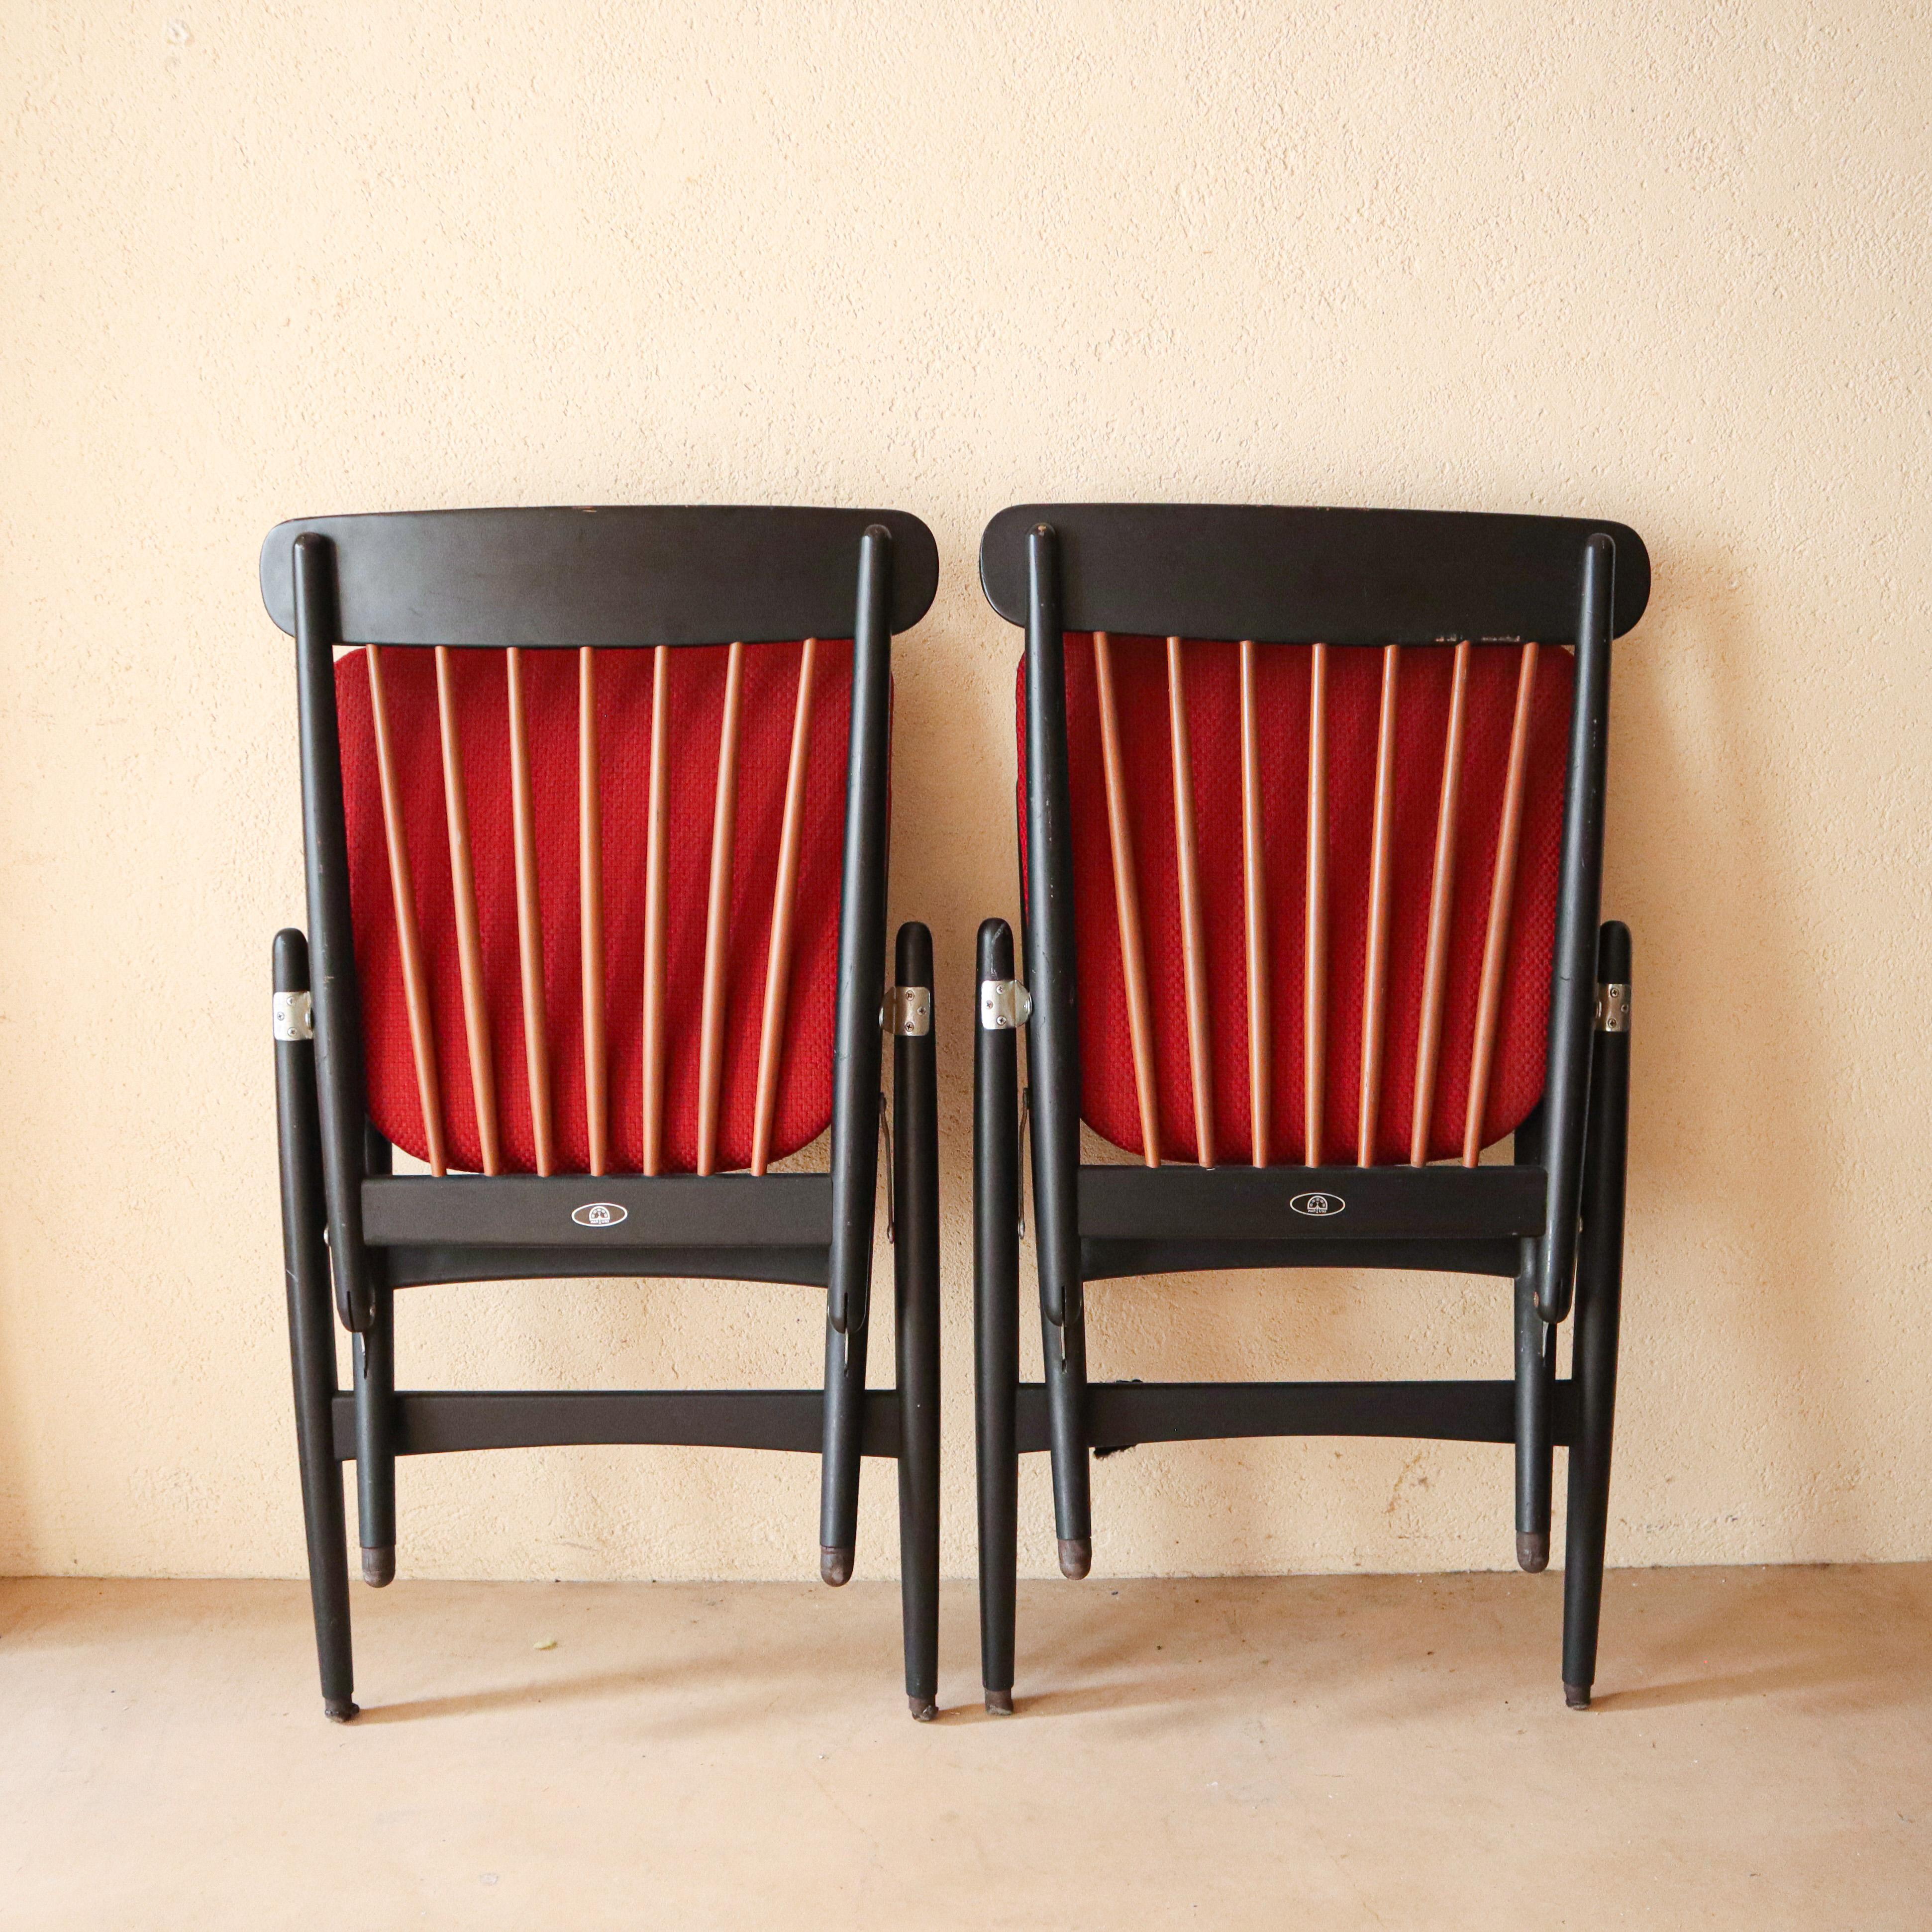 Japanese Midcentury Rare Pair of Maruni Folding Lounge Chairs For Sale 3